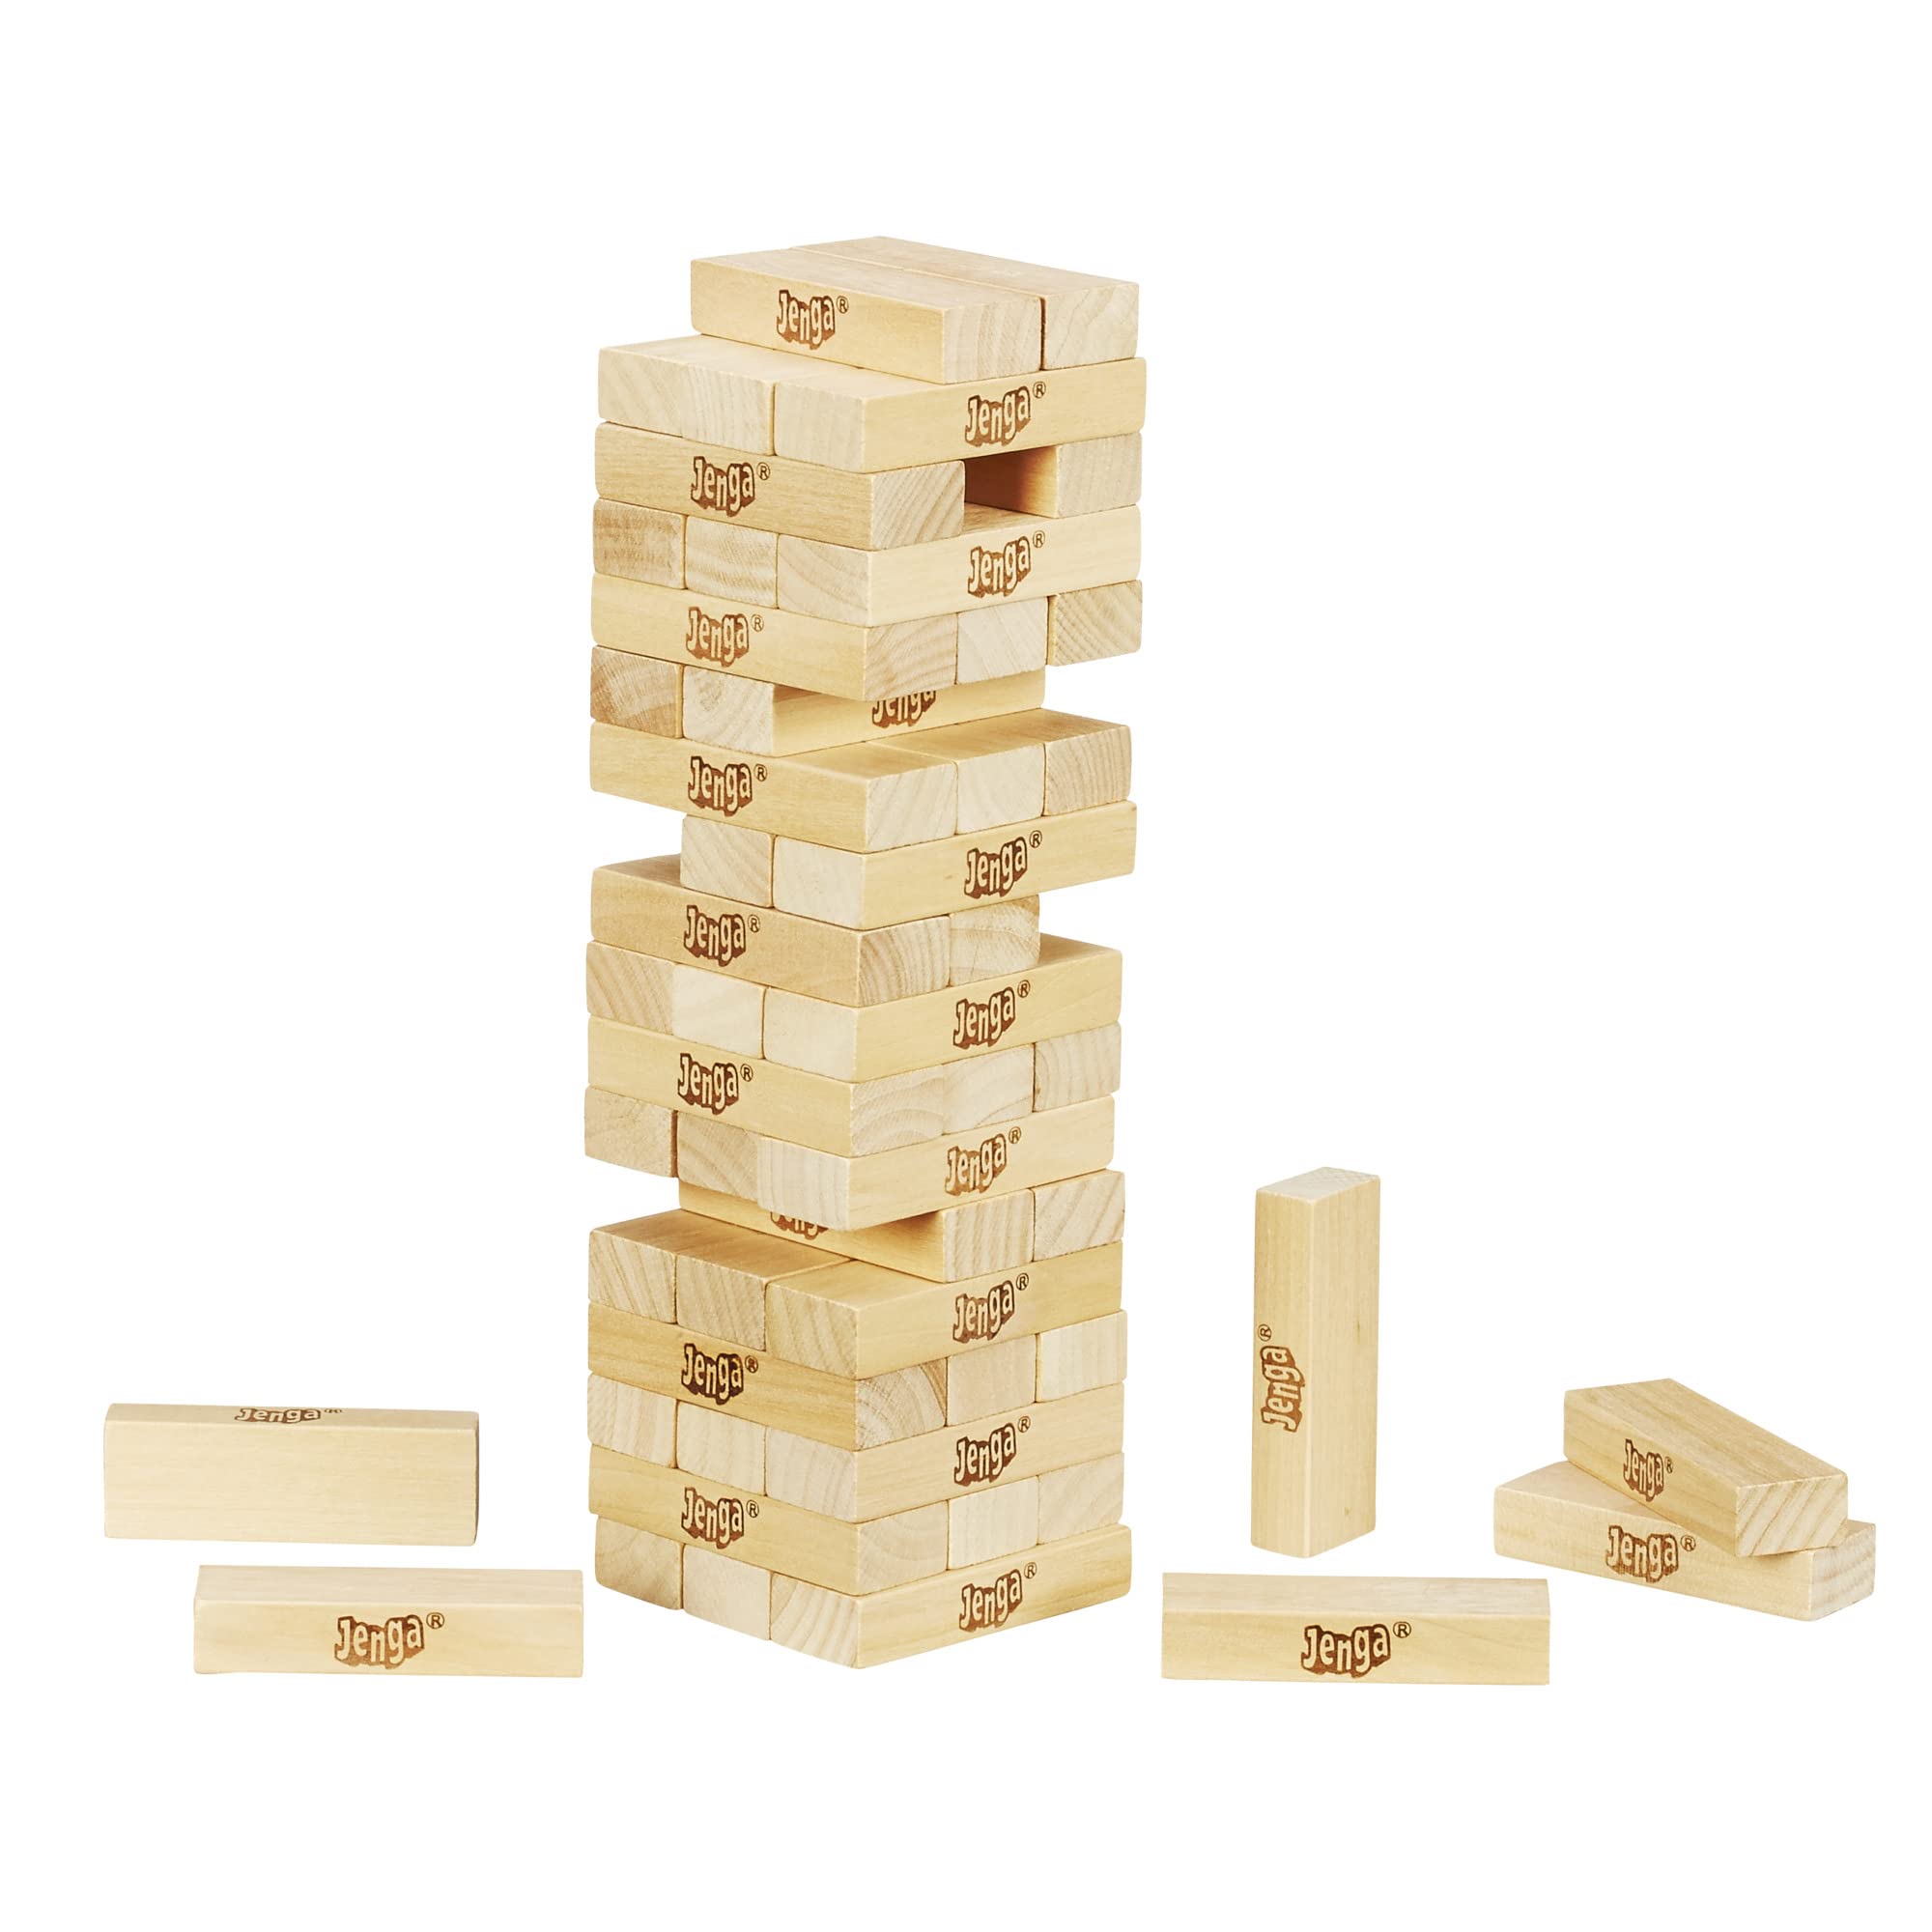 Hasbro Gaming Jenga Wooden Blocks Stacking Tumbling Tower Kids Game Ages 6 and Up (Amazon Exclusive) 3.15 x 4.53 x 11.02